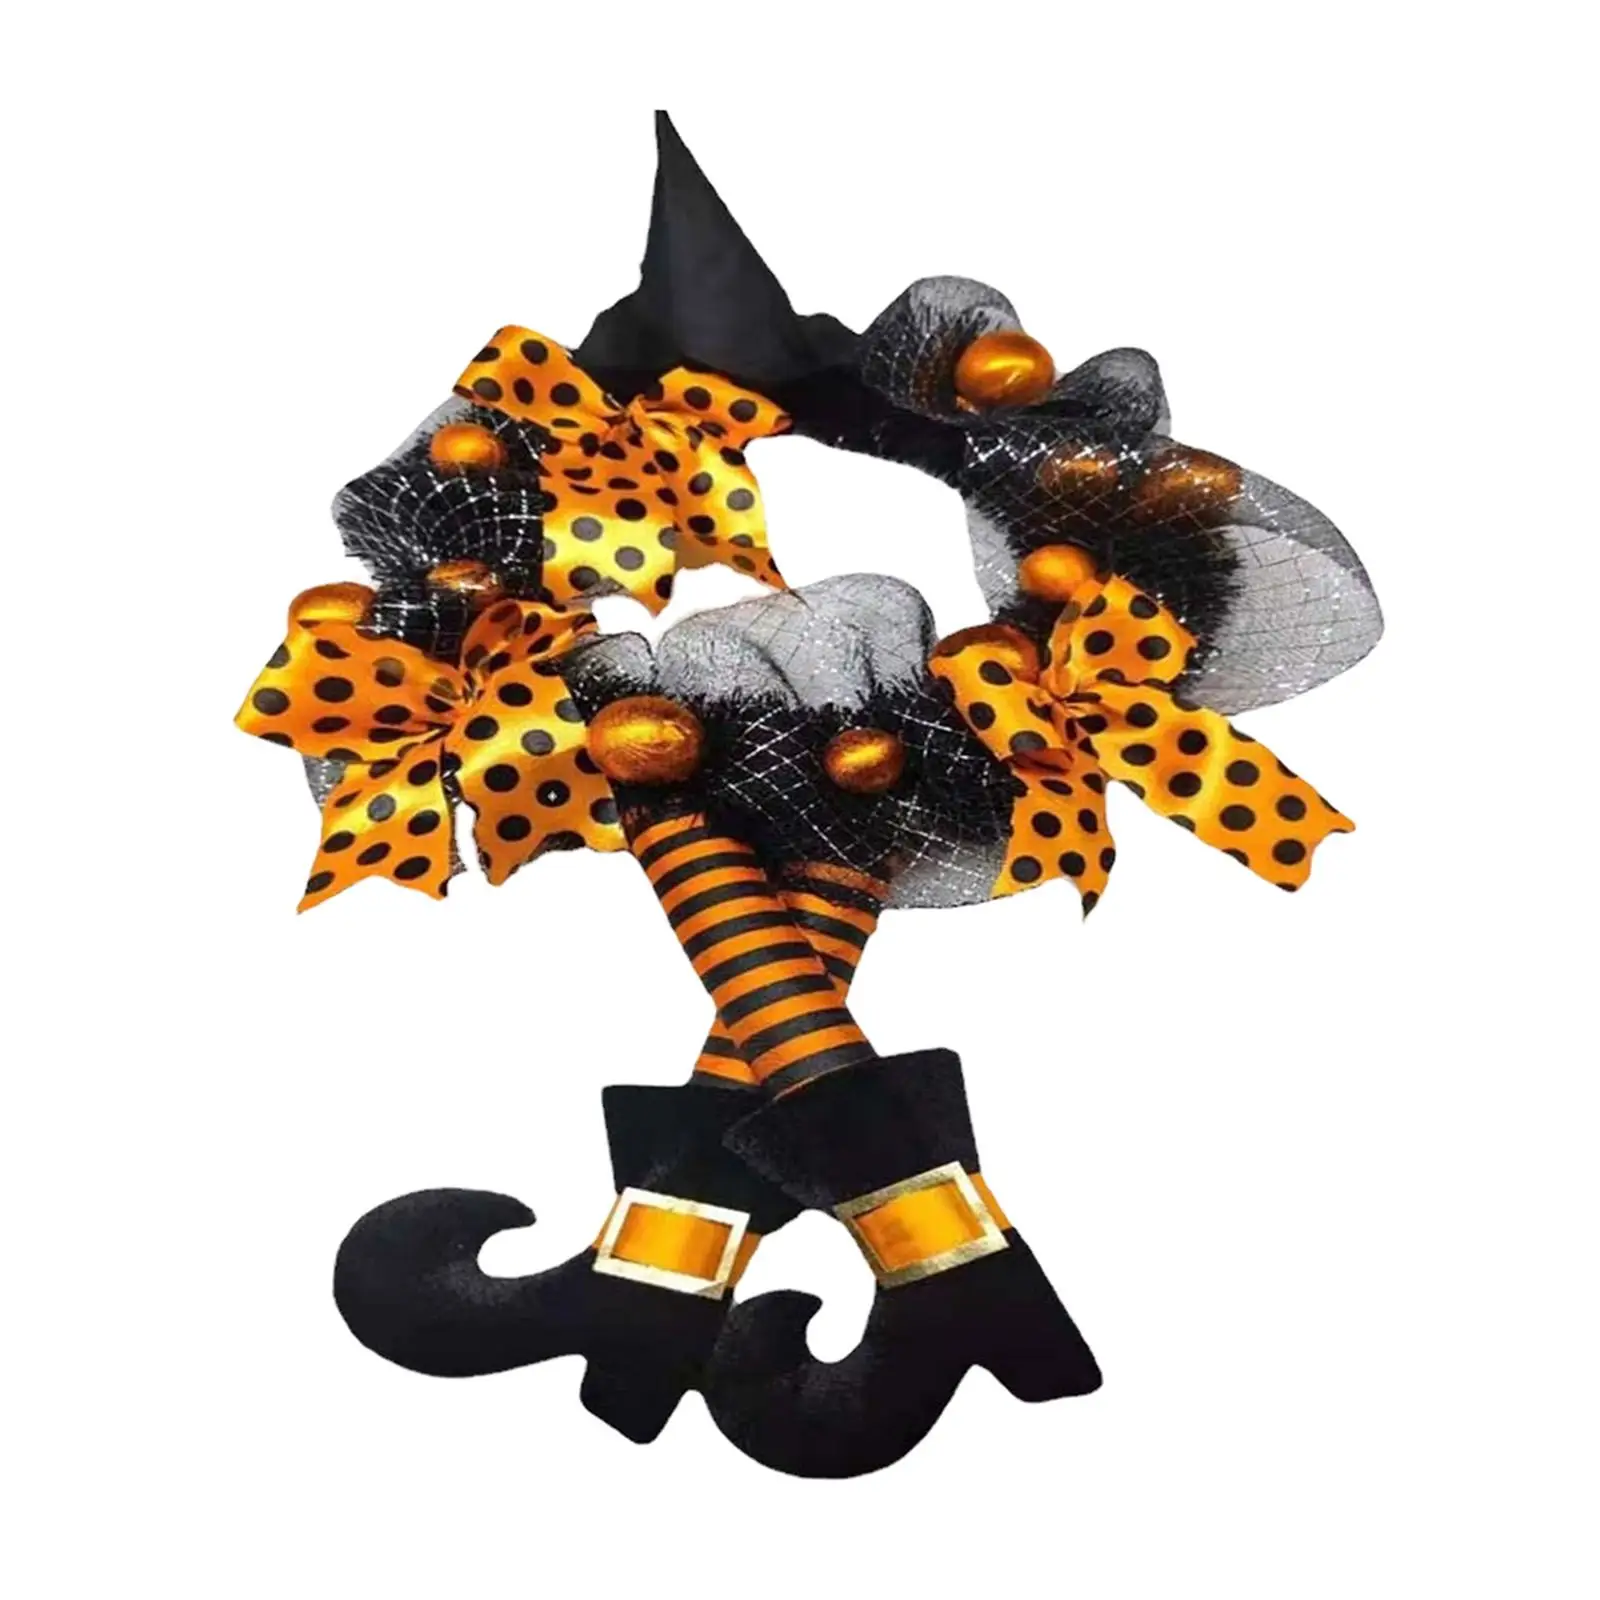 Happy Halloween Wreath with Ribbon Ornaments Witch Hat and Legs Wreath Decorative Wreath for Door Mantle Festival Decor